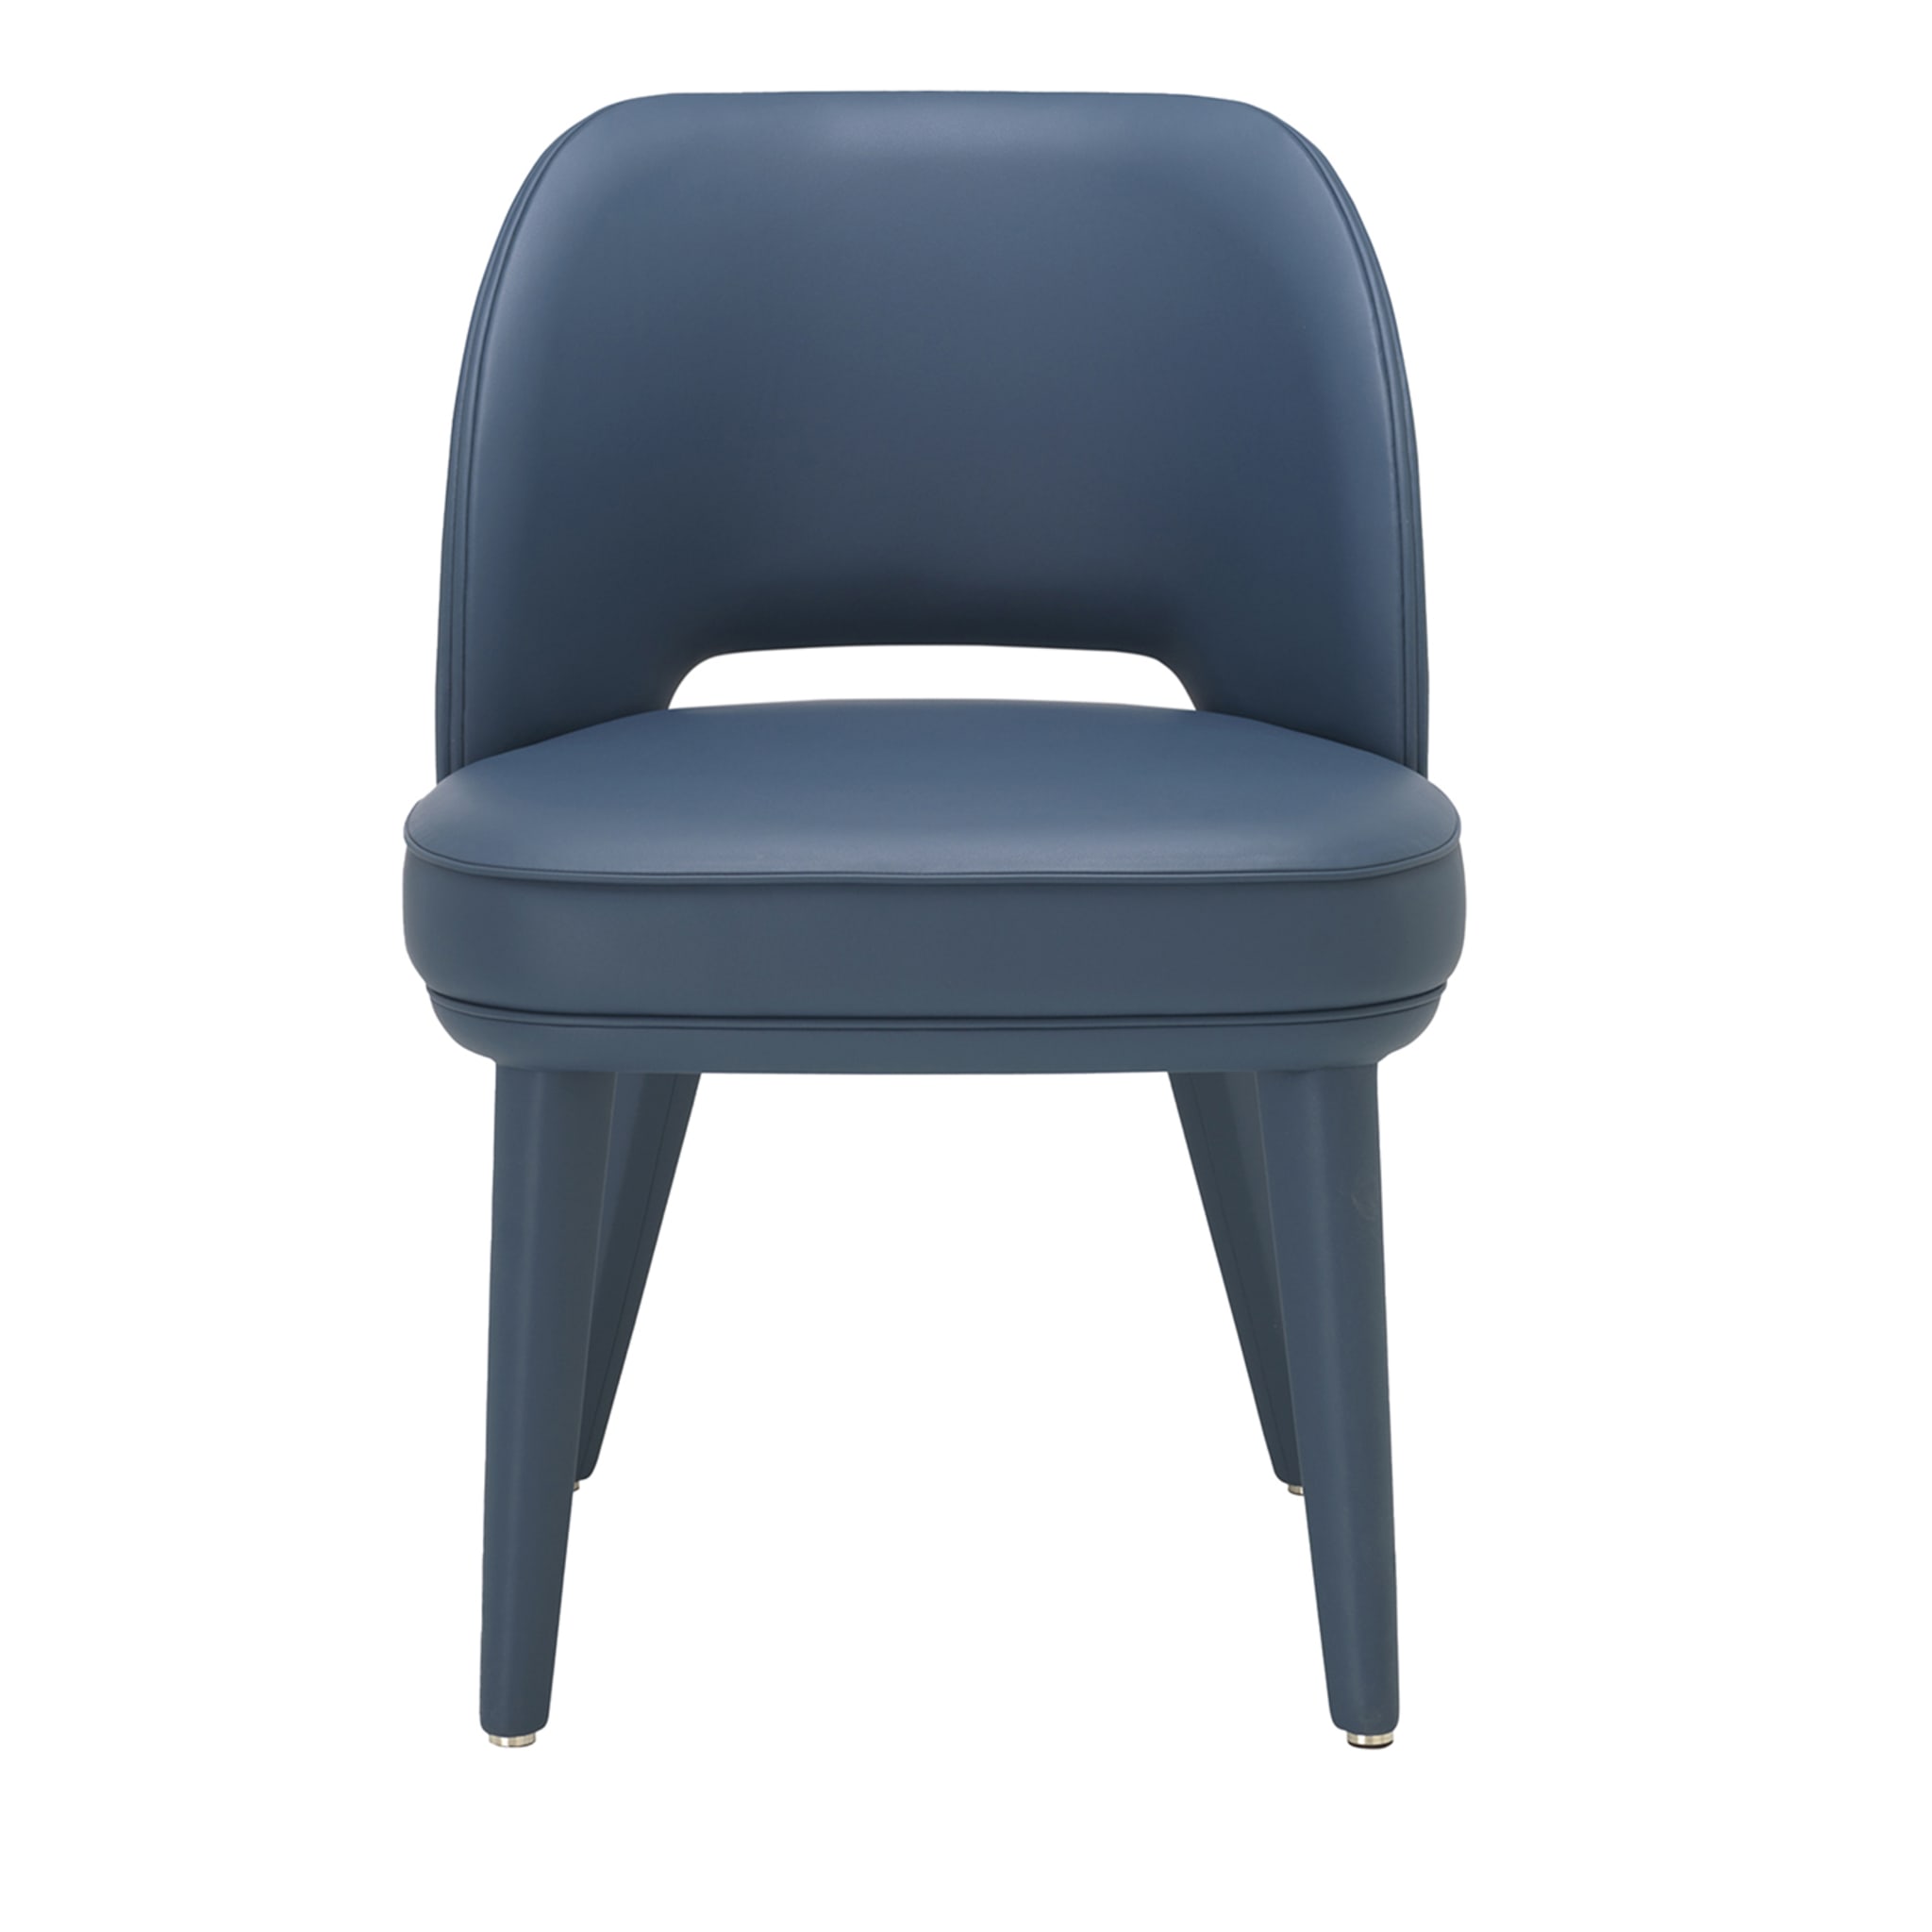 PENELOPE blue chair - Main view